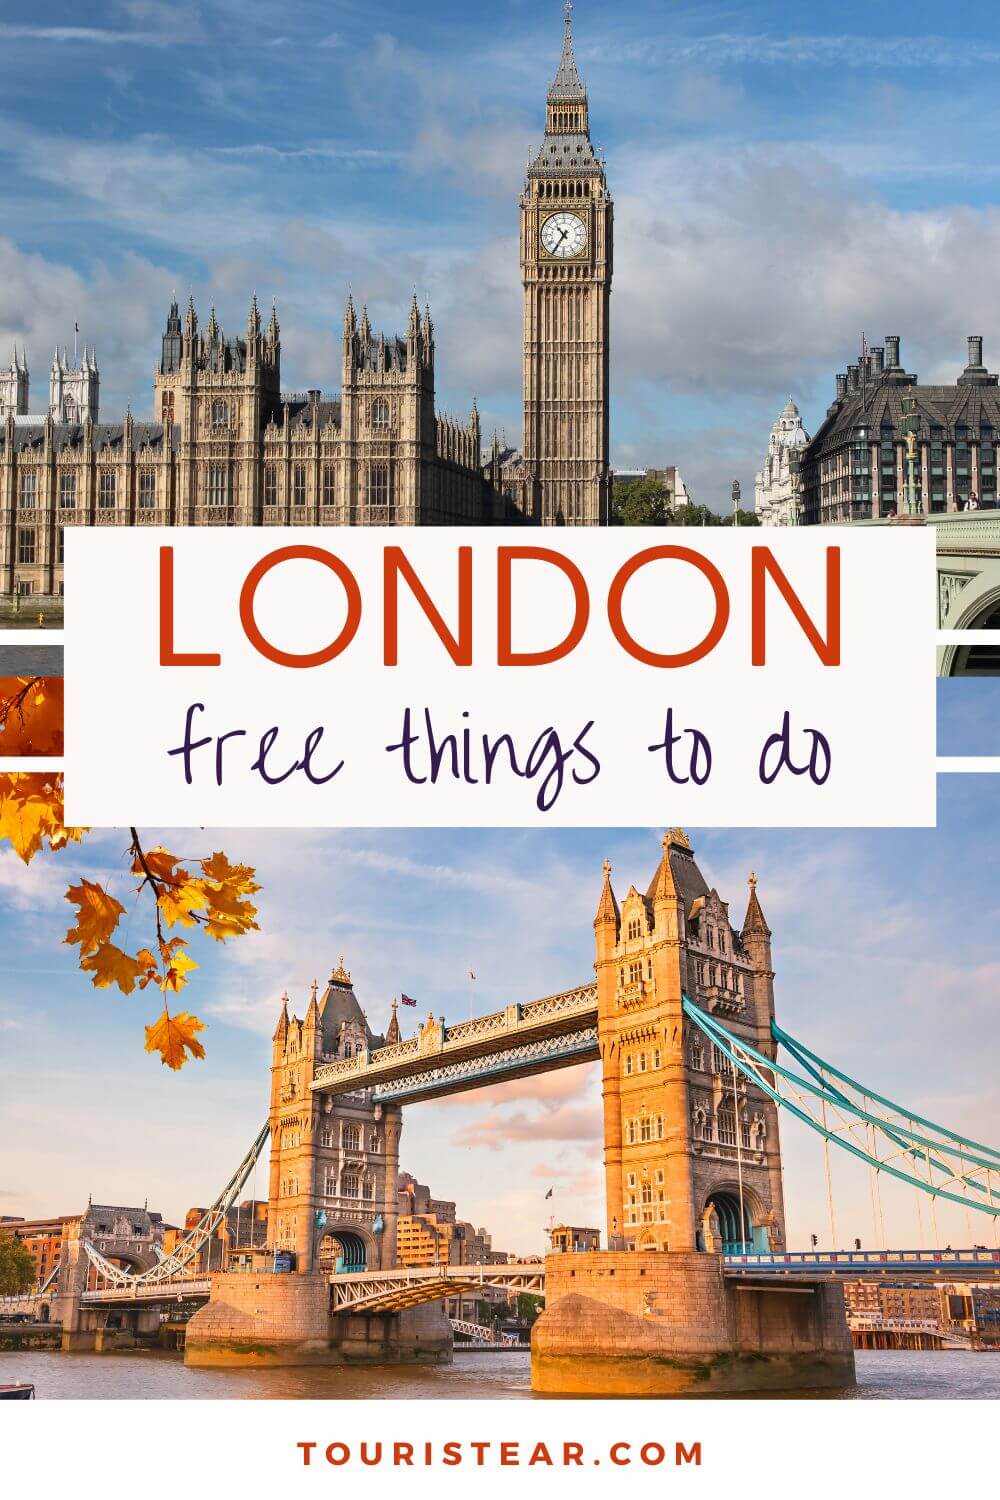 London free things to do